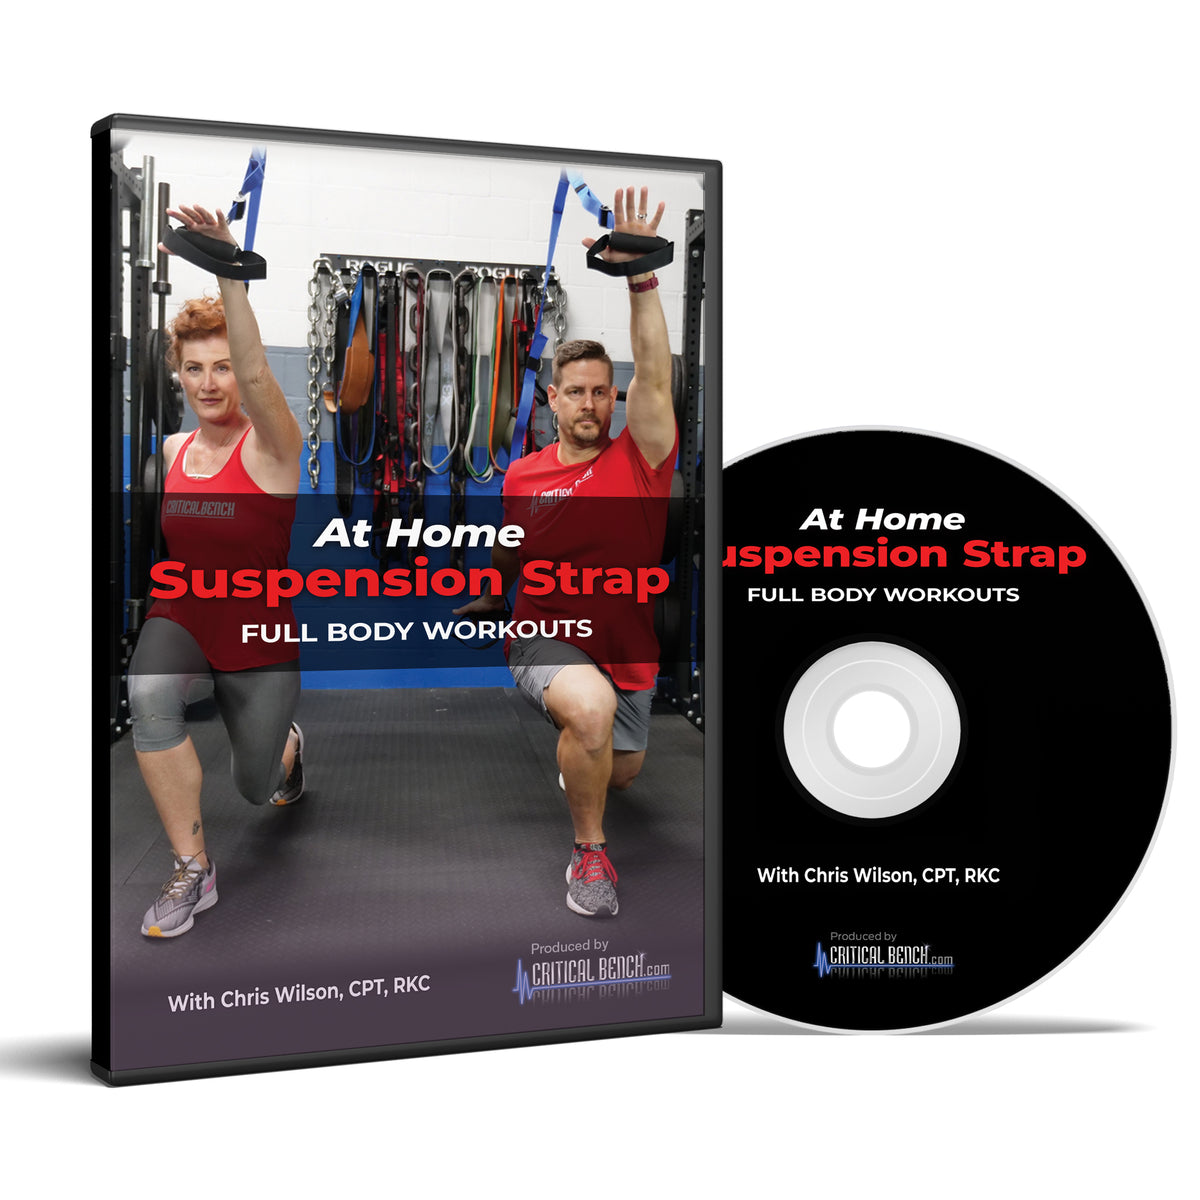 At Home Suspension Strap Full Body Workouts - Digital/DVD